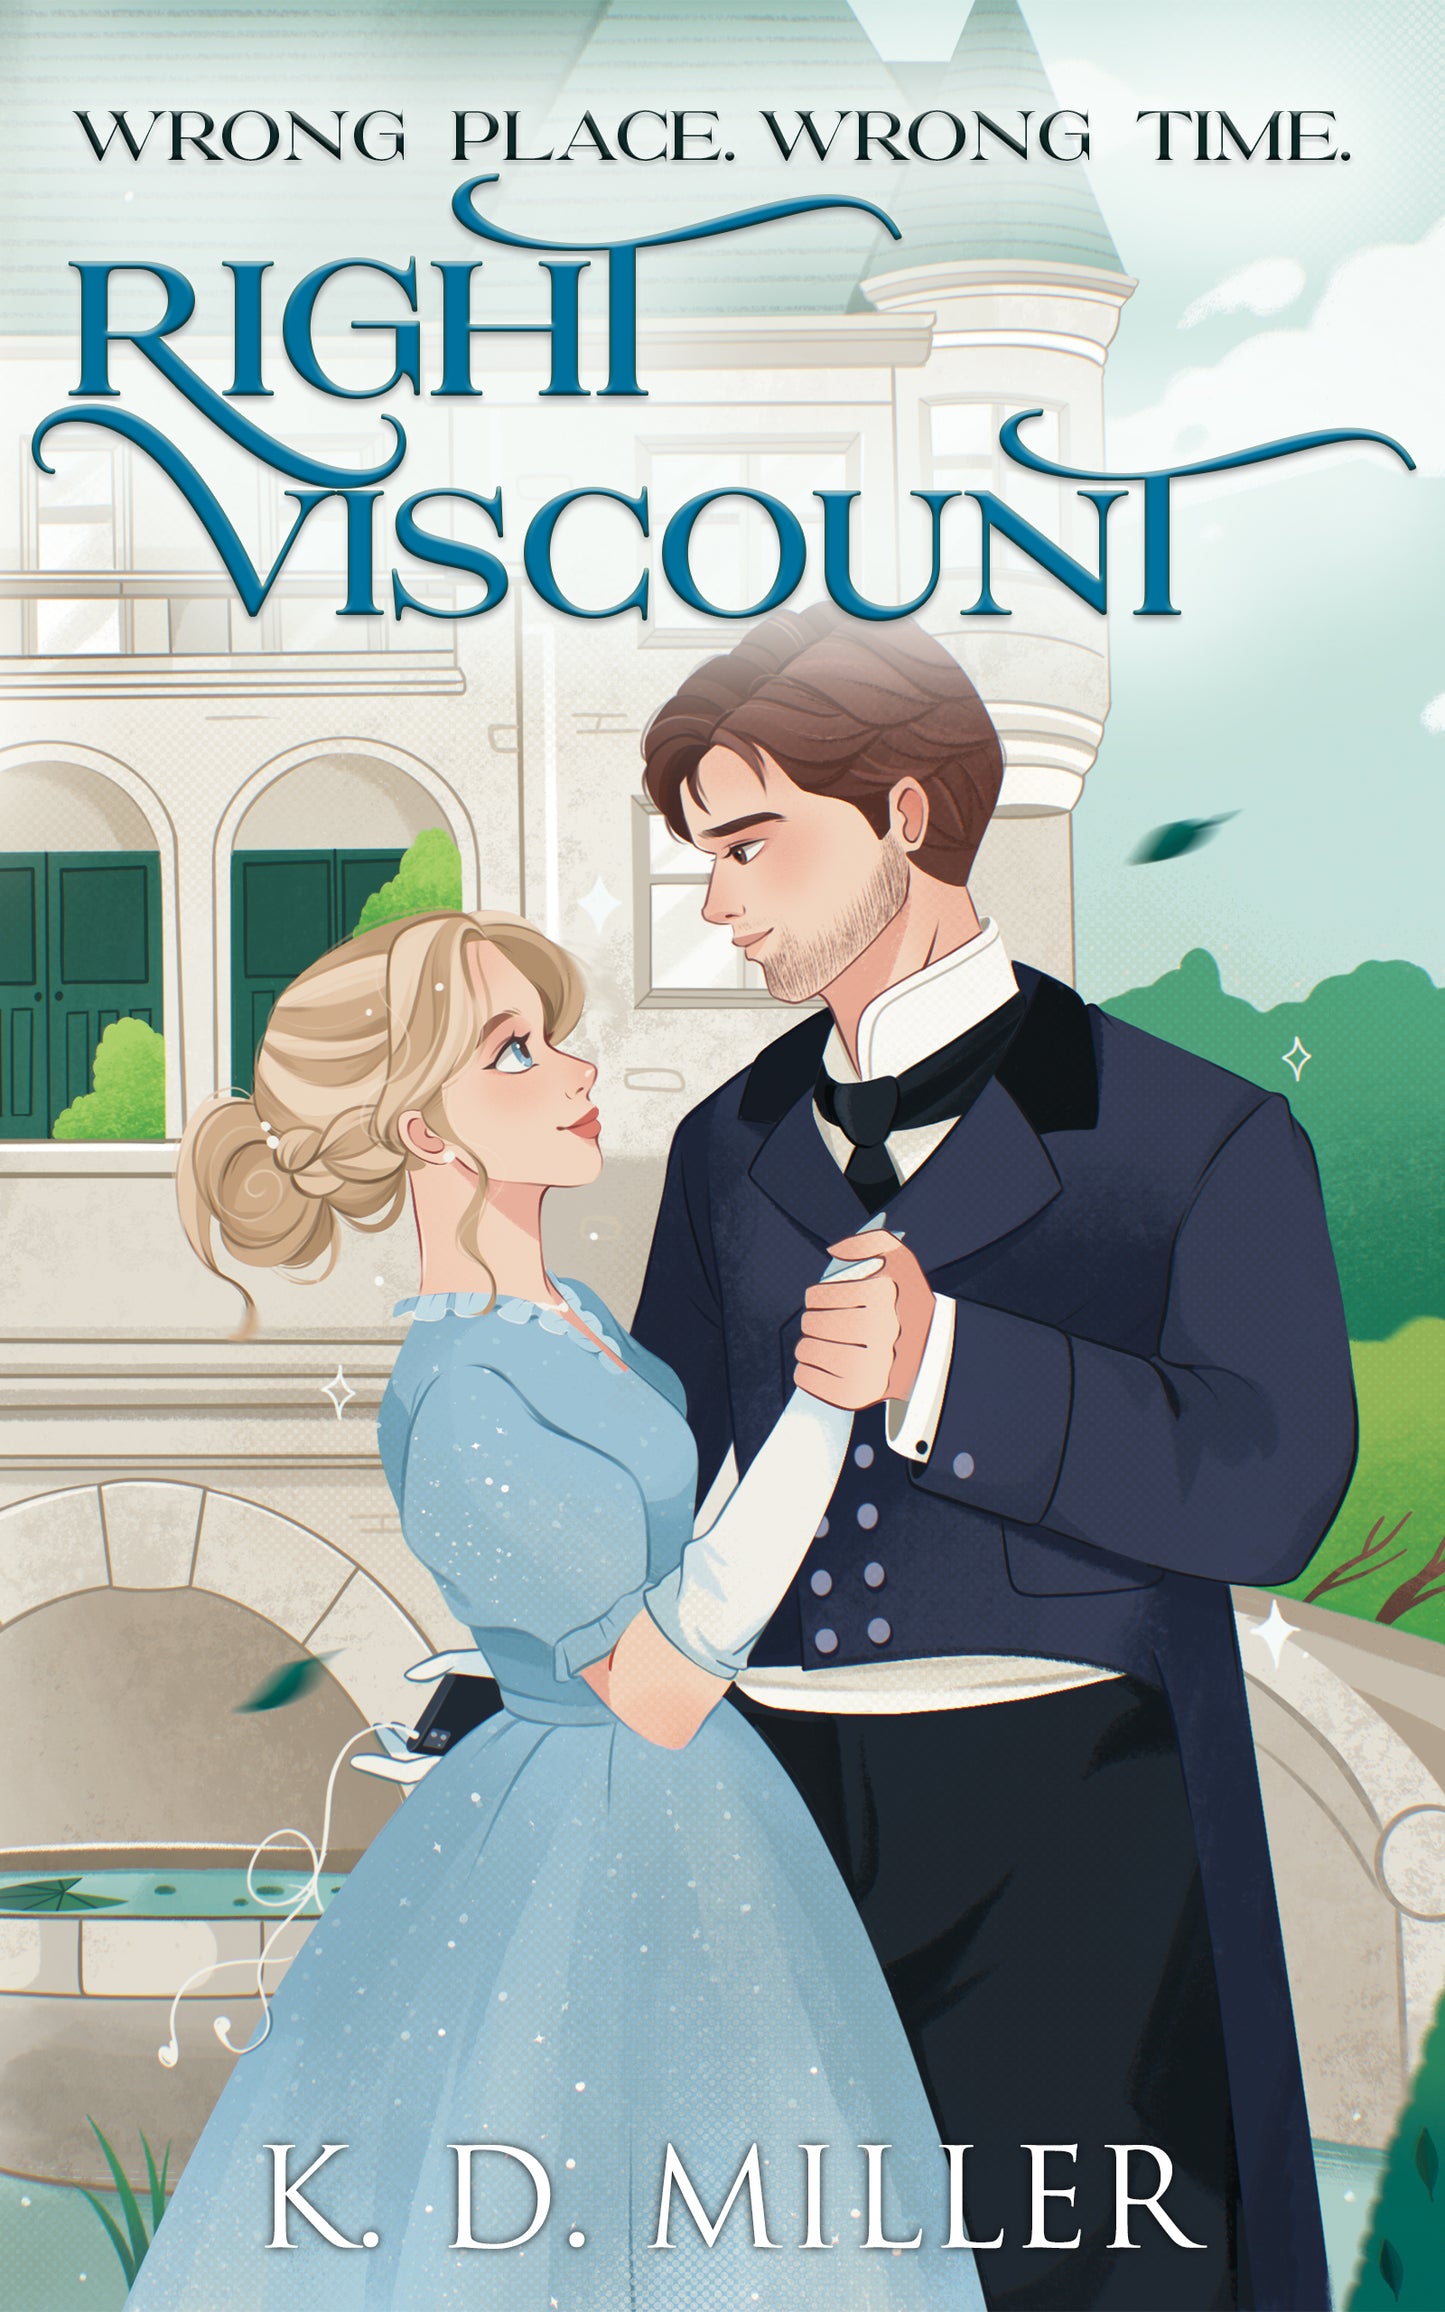 Wrong Place. Wrong Time. Right Viscount.